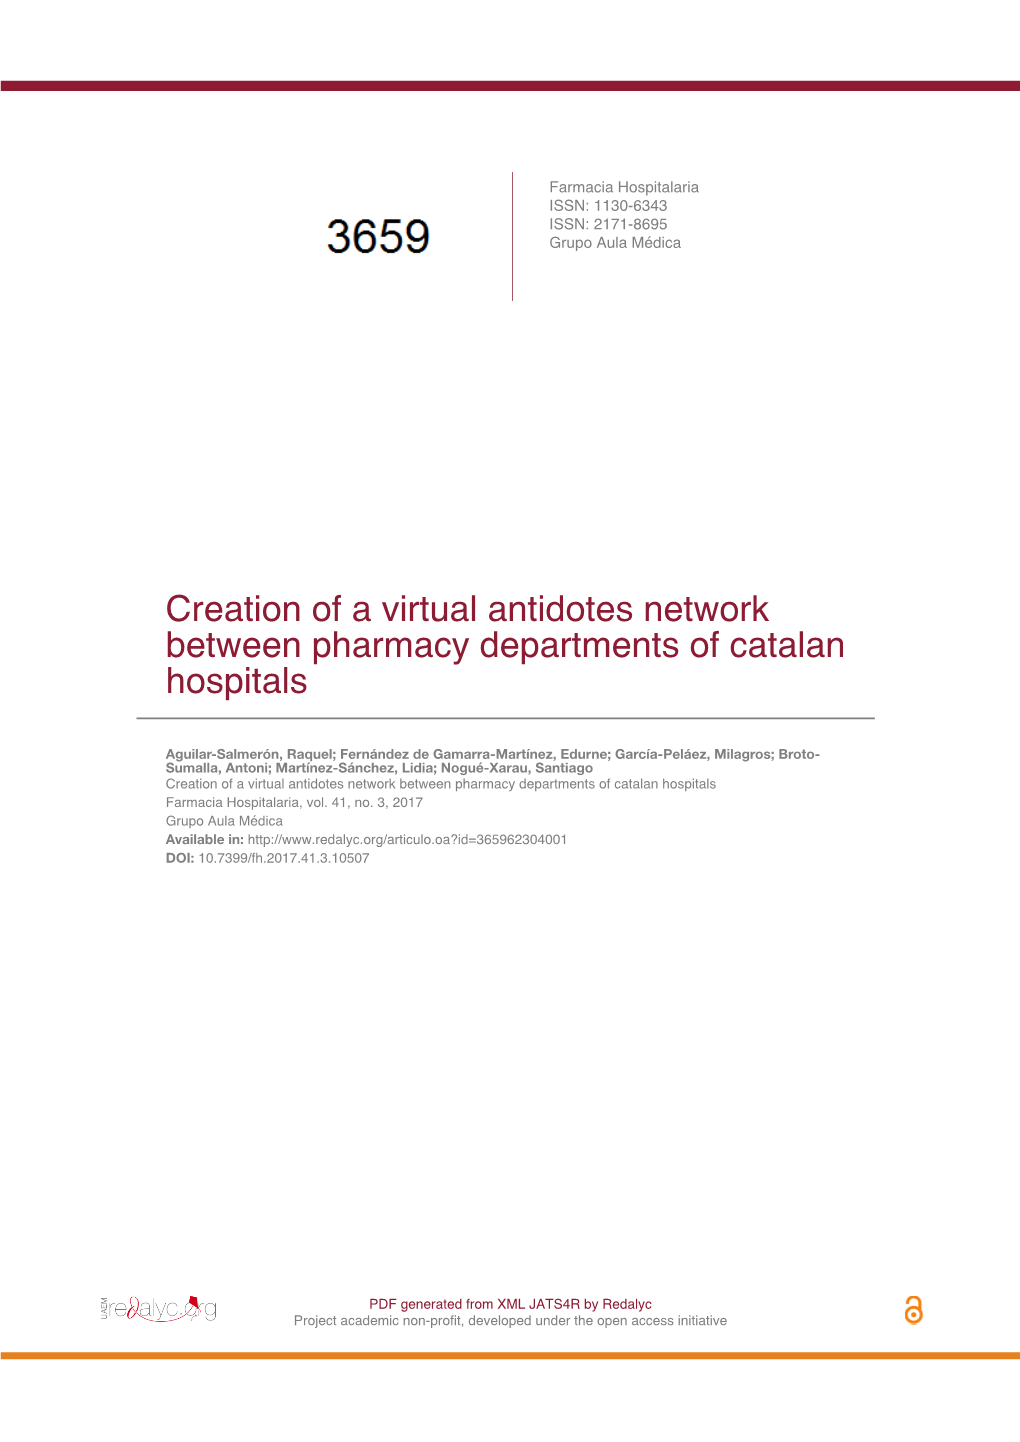 Creation of a Virtual Antidotes Network Between Pharmacy Departments of Catalan Hospitals